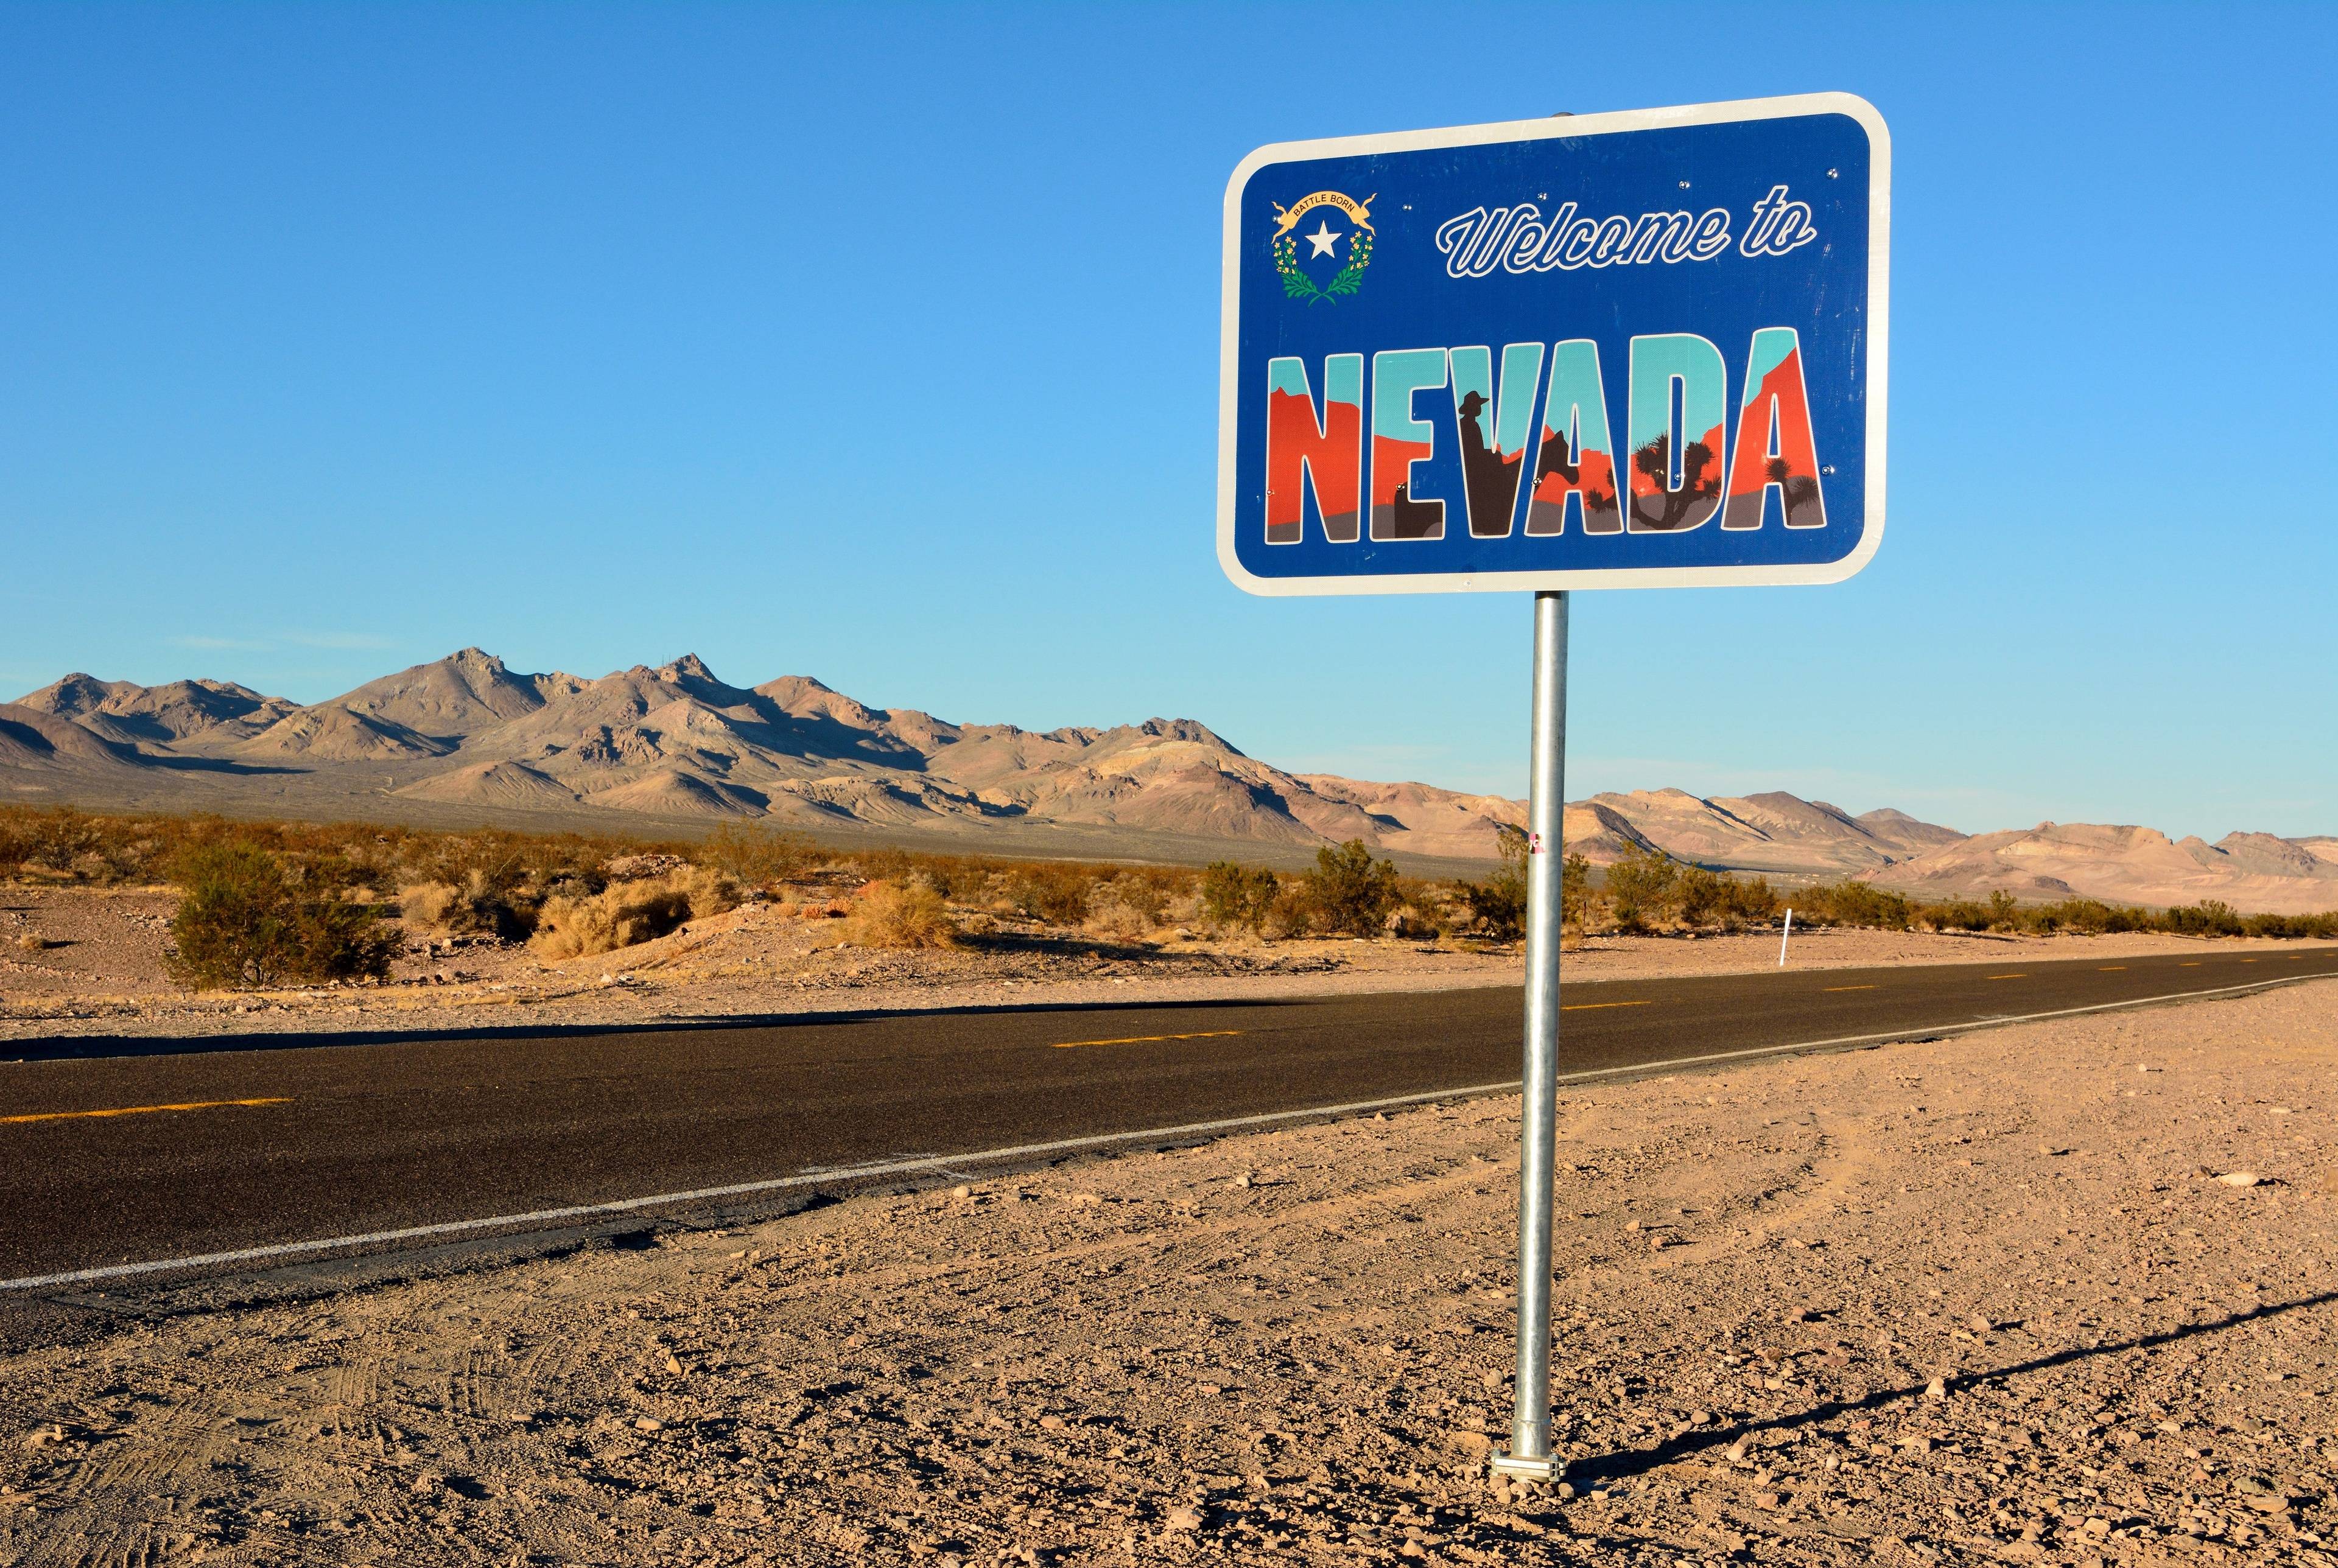 ⚡️ Las Vegas to Los Angeles: A Historic Road Trip Between Sun-Drenched States